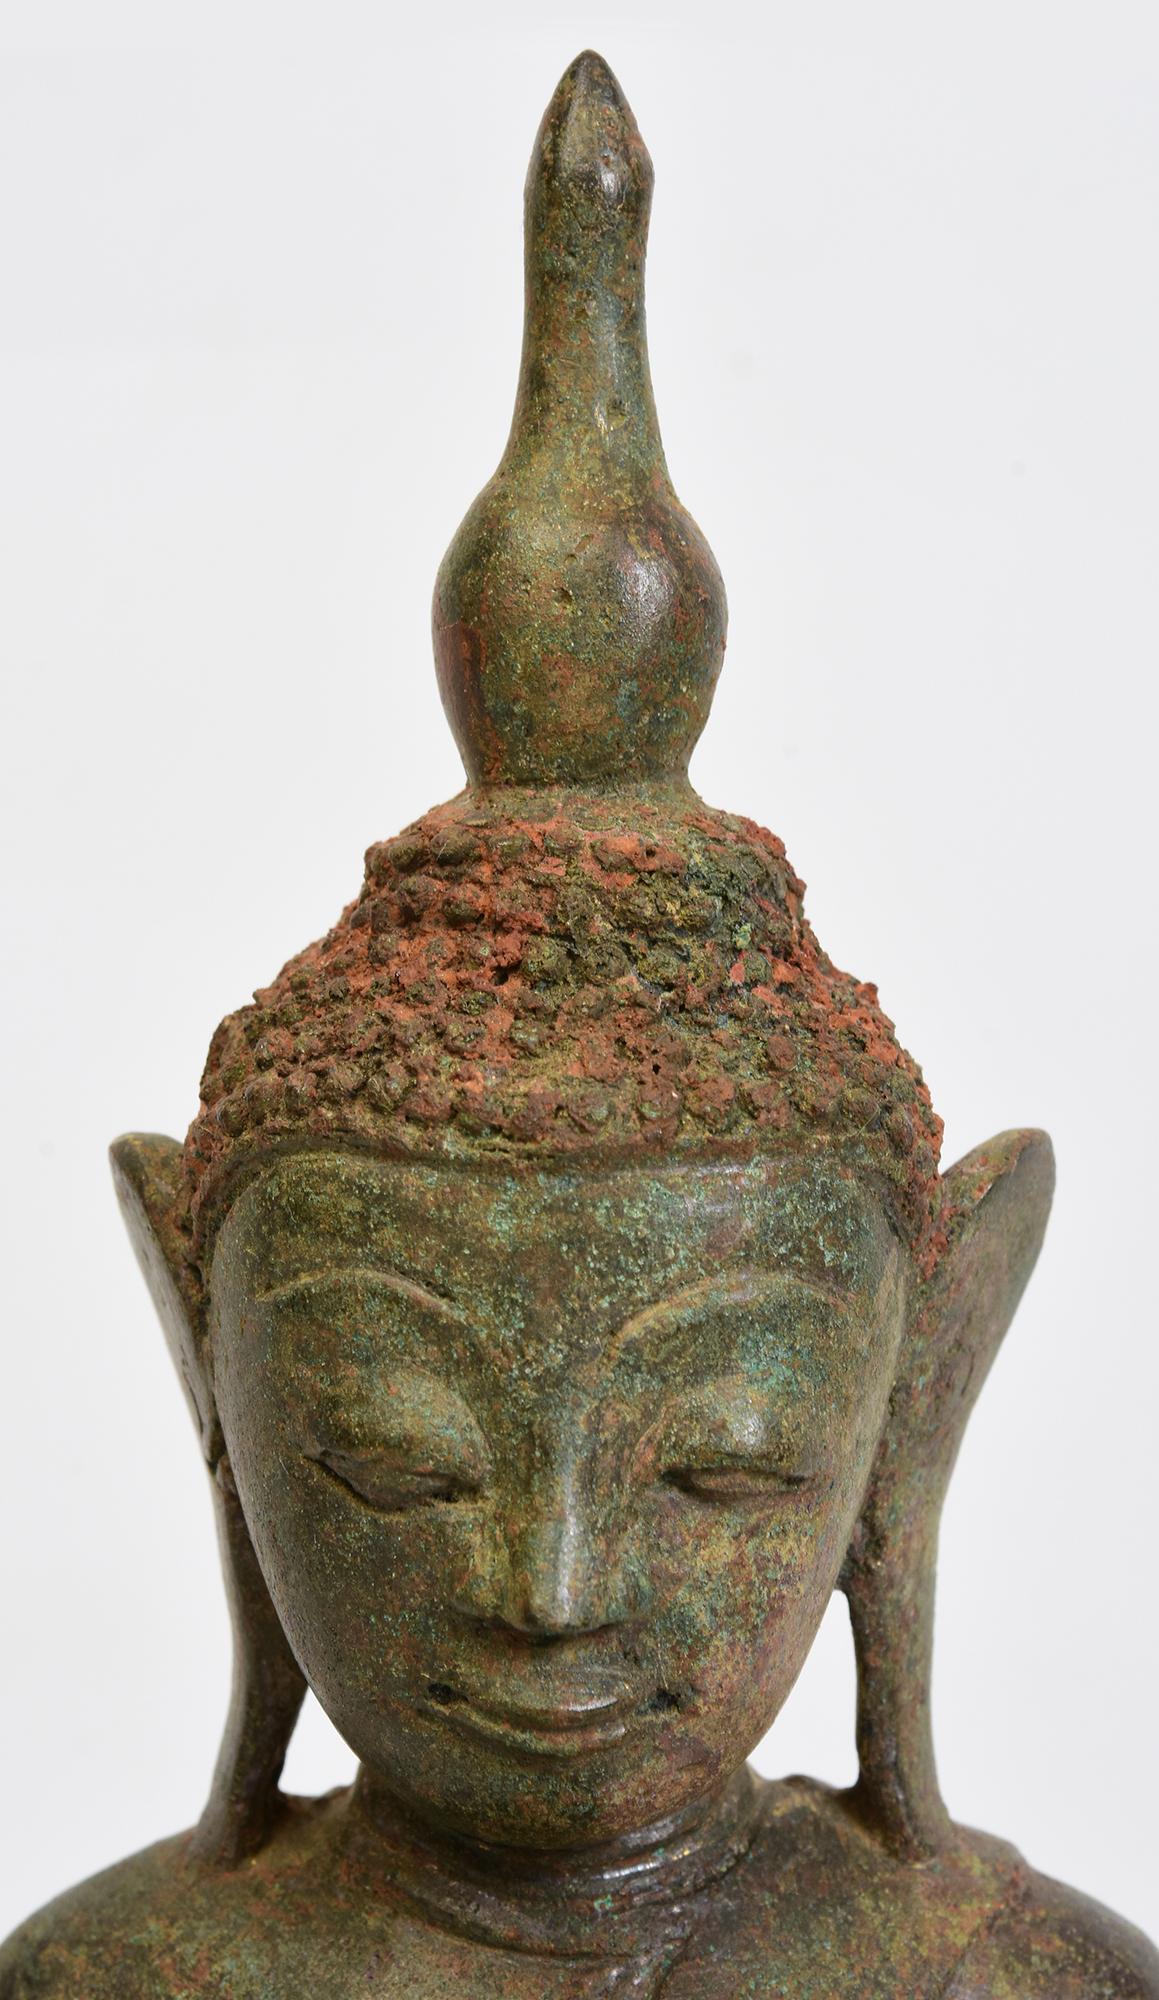 Antique Burmese bronze Buddha sitting in Mara Vijaya (calling the earth to witness) posture on double lotus base.

Age: Burma, Ava Period, 16th Century
Size: Height 32.5 C.M. / Width 16.2 C.M. / Depth 10.4 C.M.
Condition: Some expected degradation